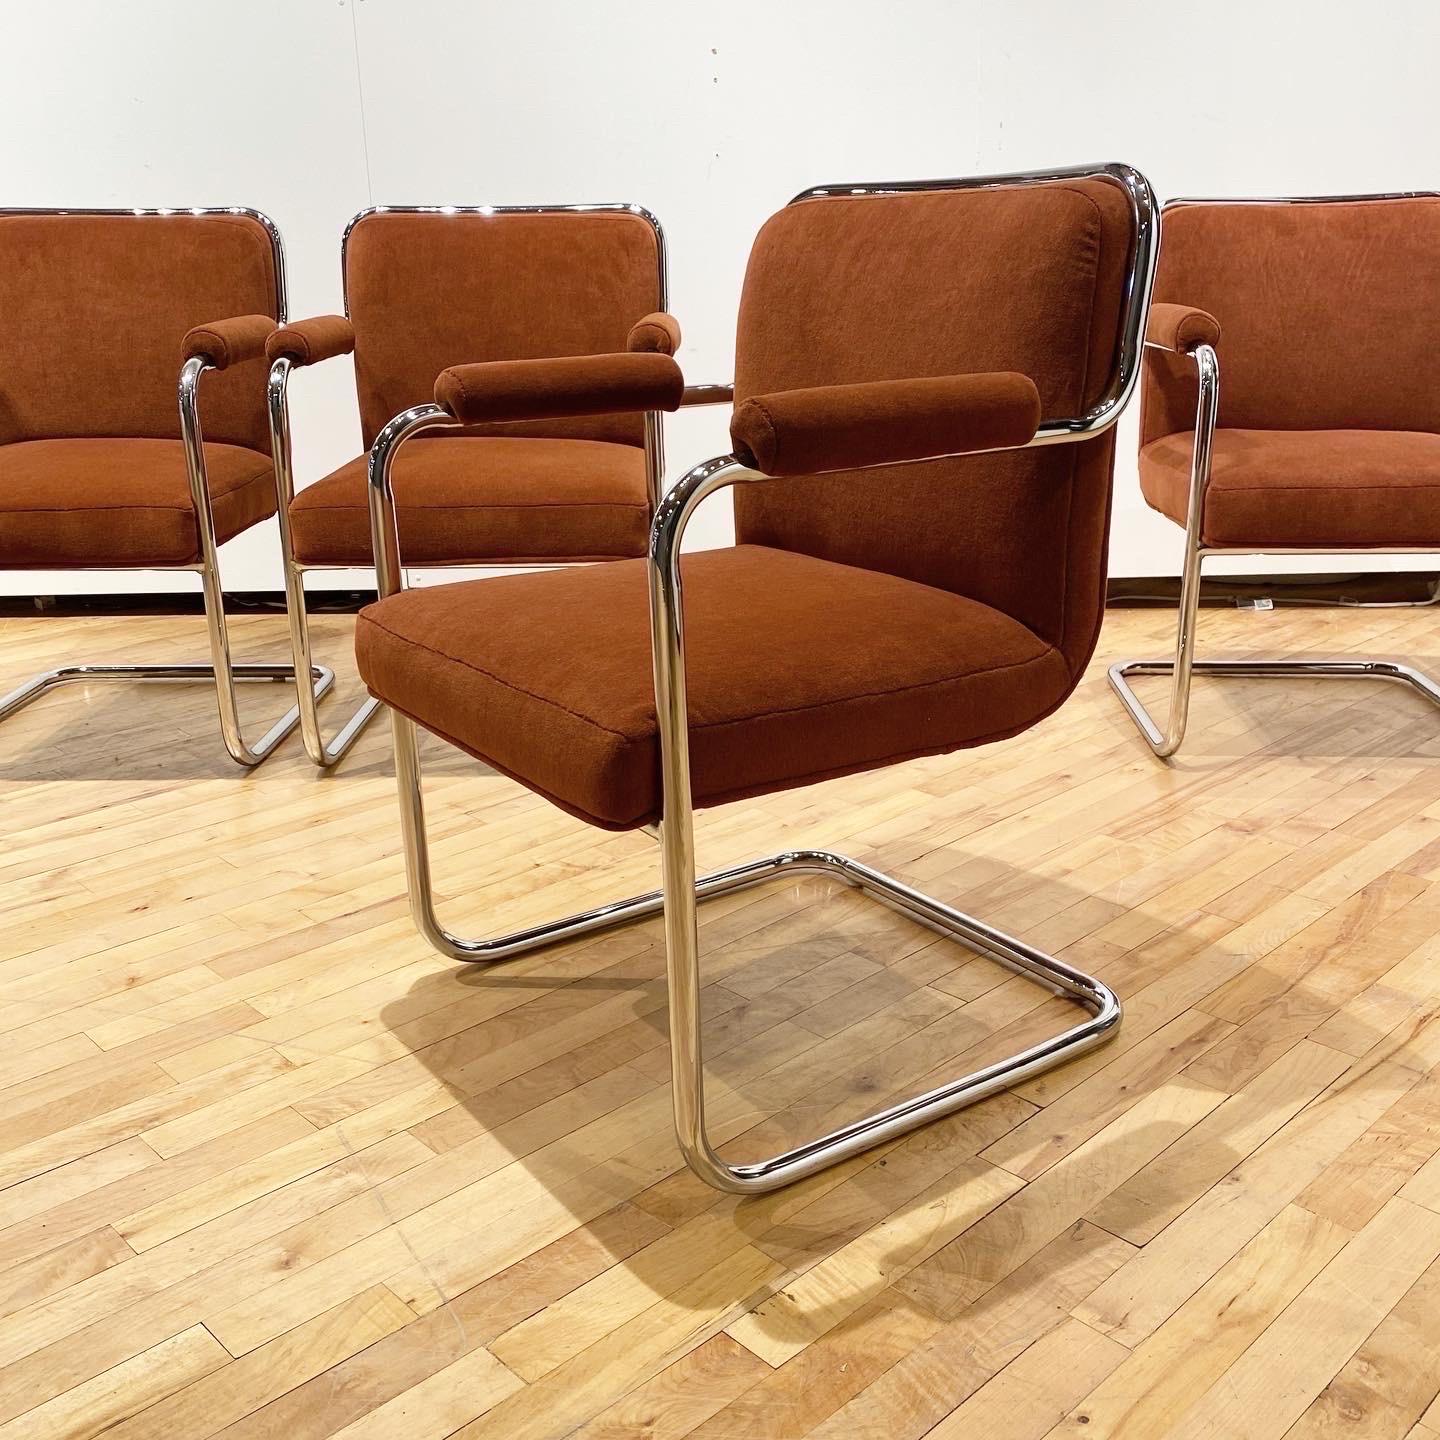 A classic set of cantilevered armchairs in the style of Marcel Breuer and Mies Van Der Rohe. These have a wrap around tube frame with newly upholstered seat and back. The rust colored velvet is sturdy and soft and a wonderful contrast to the chrome